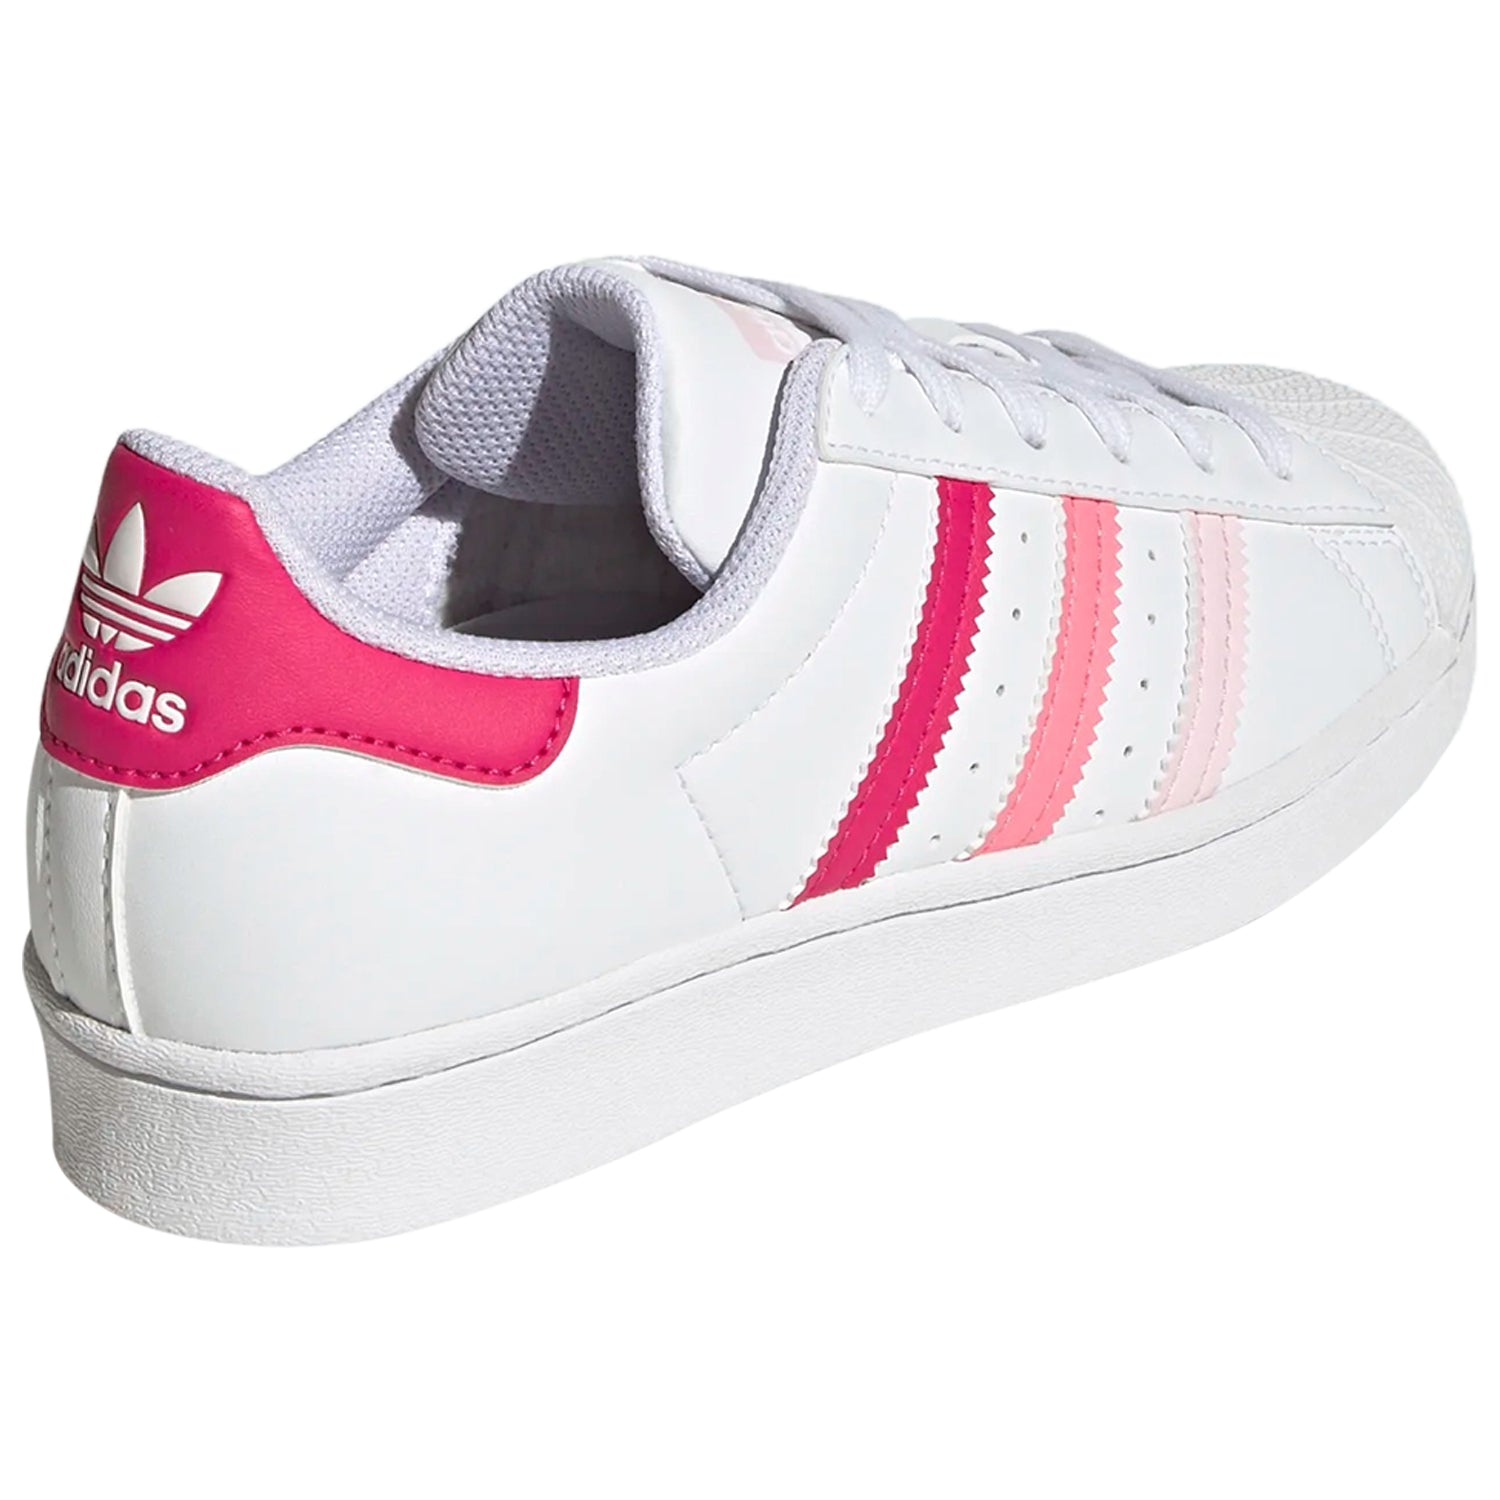 Adidas Superstar Mens Style : Gy9328